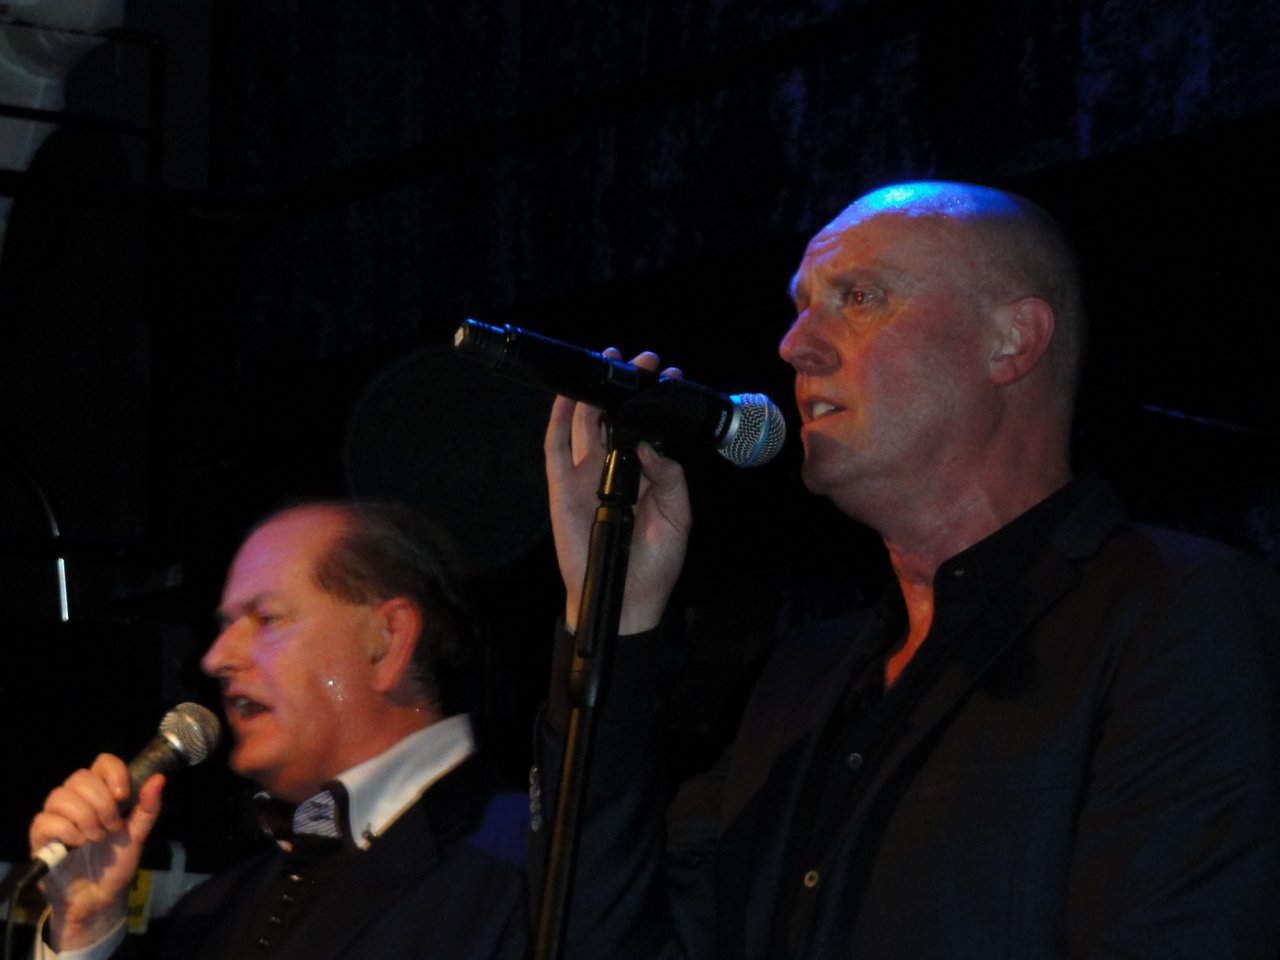 23 Heaven 17 at the Jazz Cafe.jpg